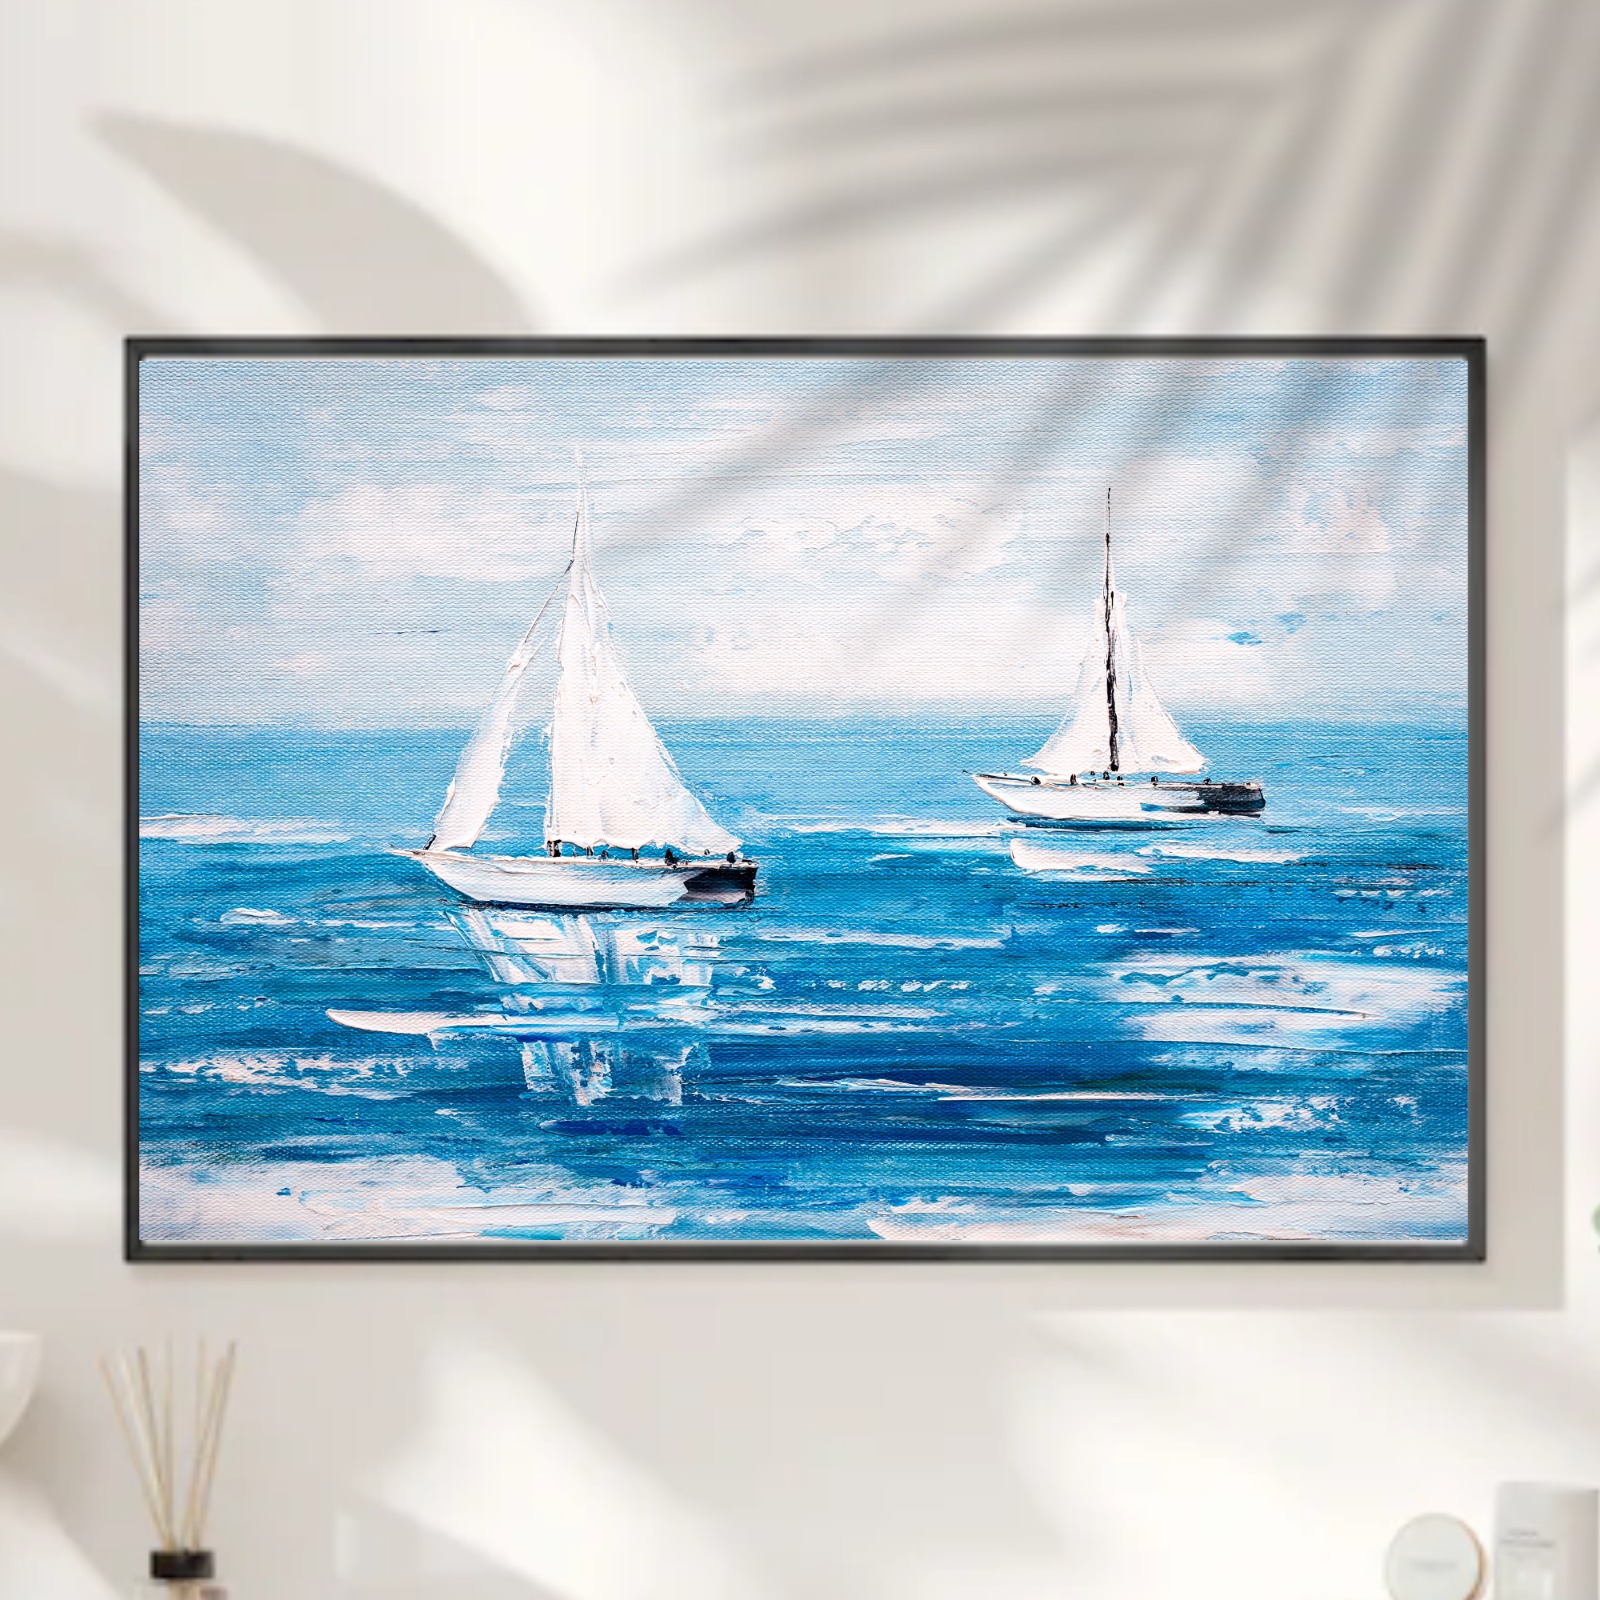 <p><a target="_blank" rel="noopener noreferrer nofollow" href="https://pickygallery.com/en/shop/Beach-house-frames"><span style="color: rgb(33, 37, 41)">Sea House Frames</span></a></p>